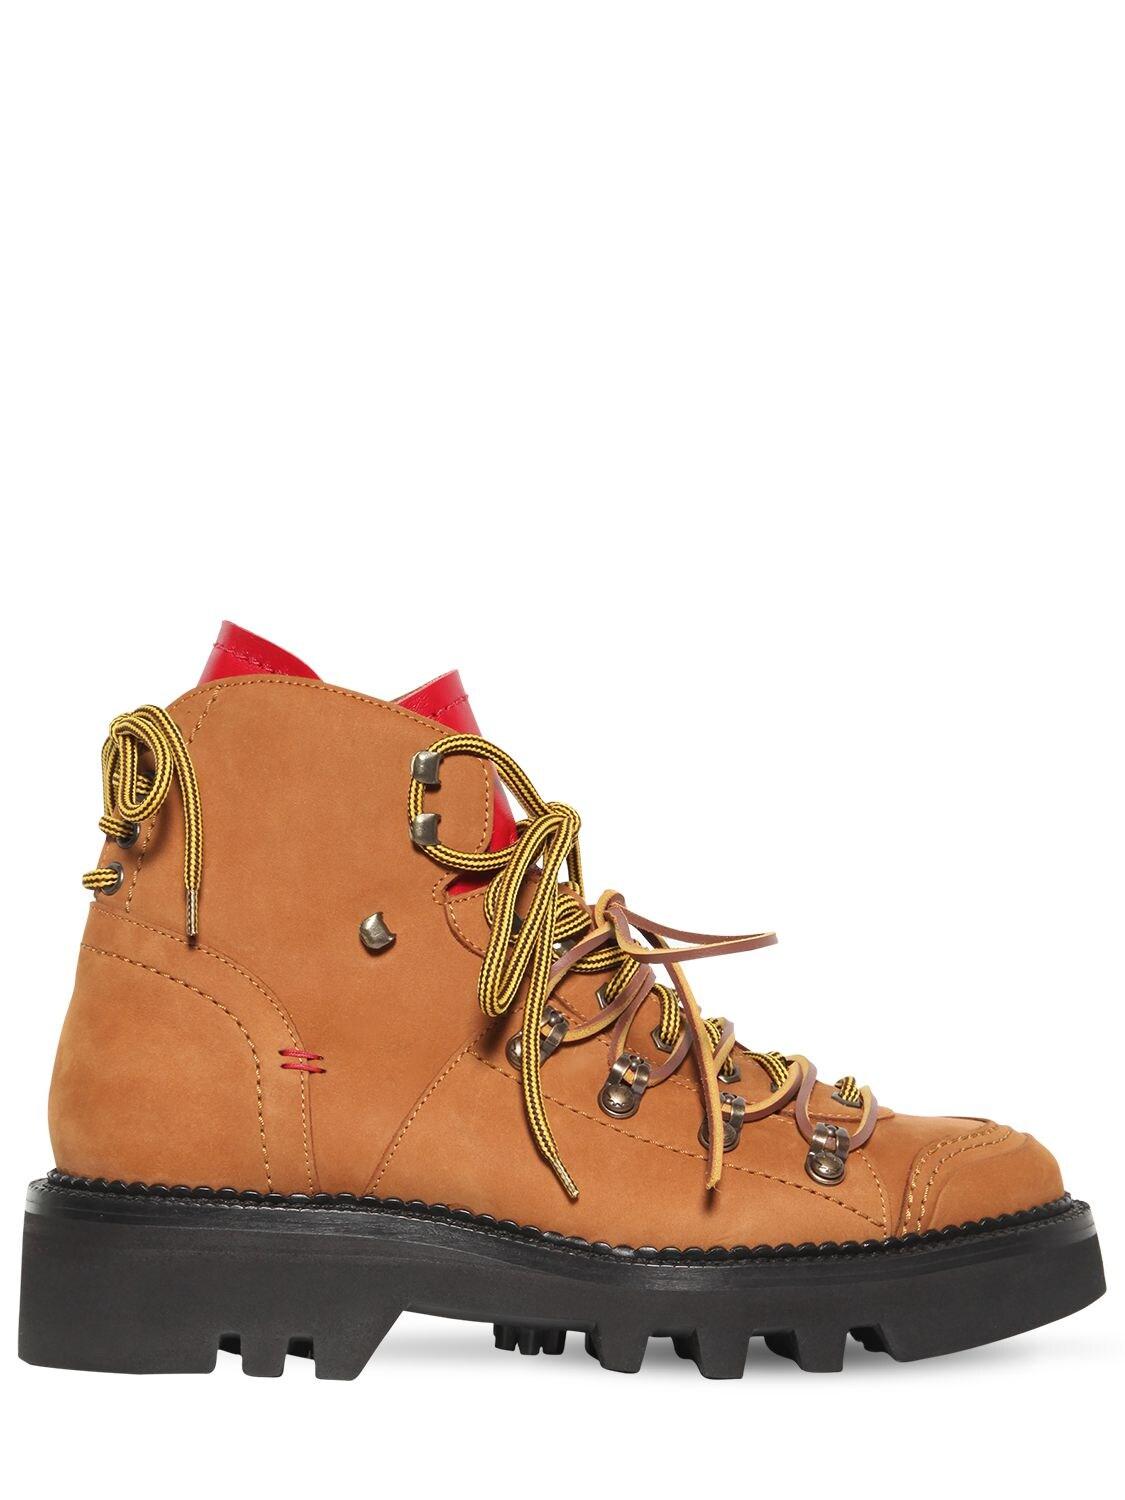 DSquared² Lace 50mm Nubuck Hiking Boots in Natural for Men - Lyst